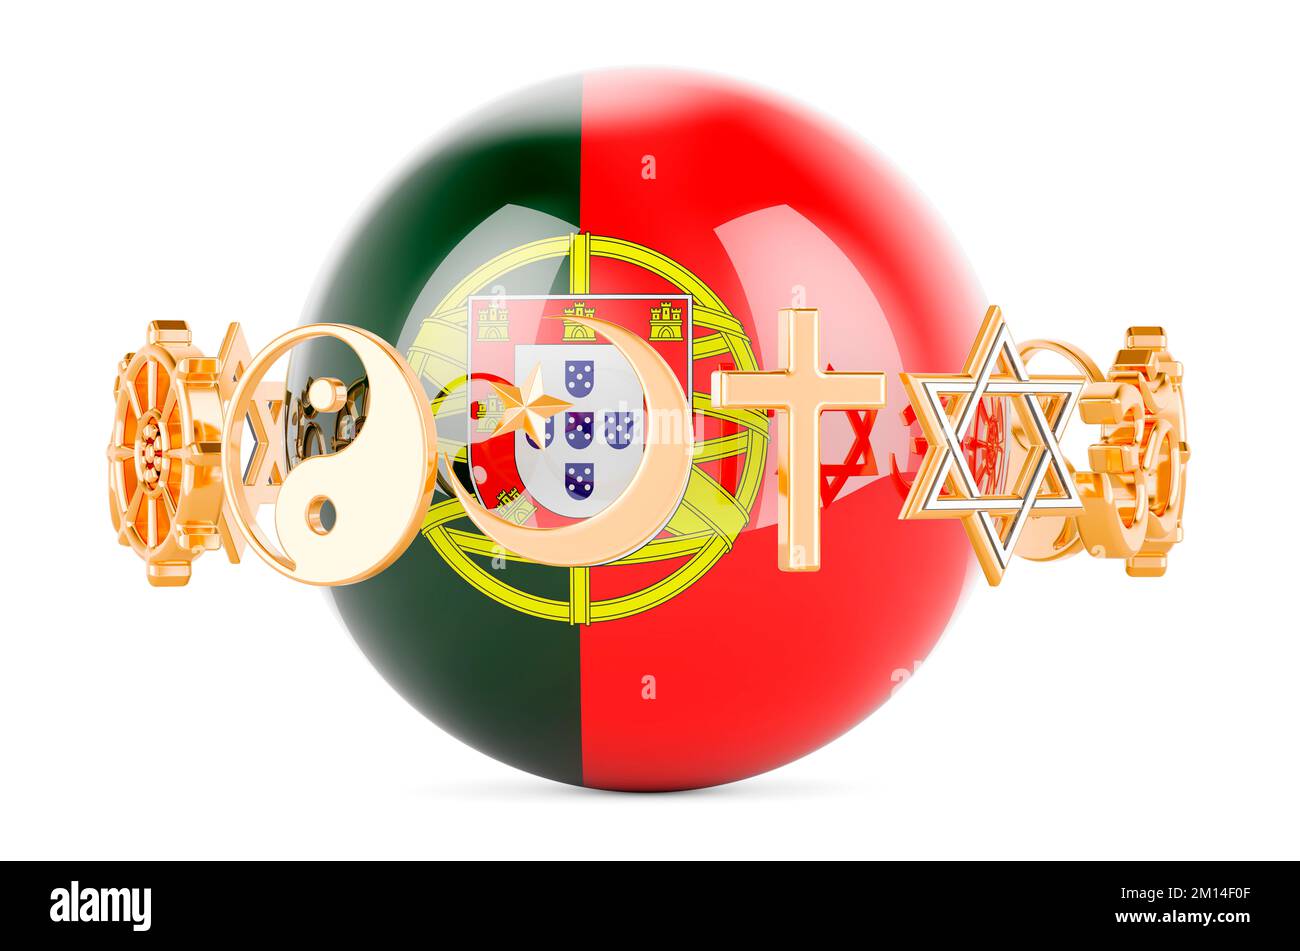 Portuguese flag painted on sphere with religions symbols around, 3D rendering isolated on white background Stock Photo